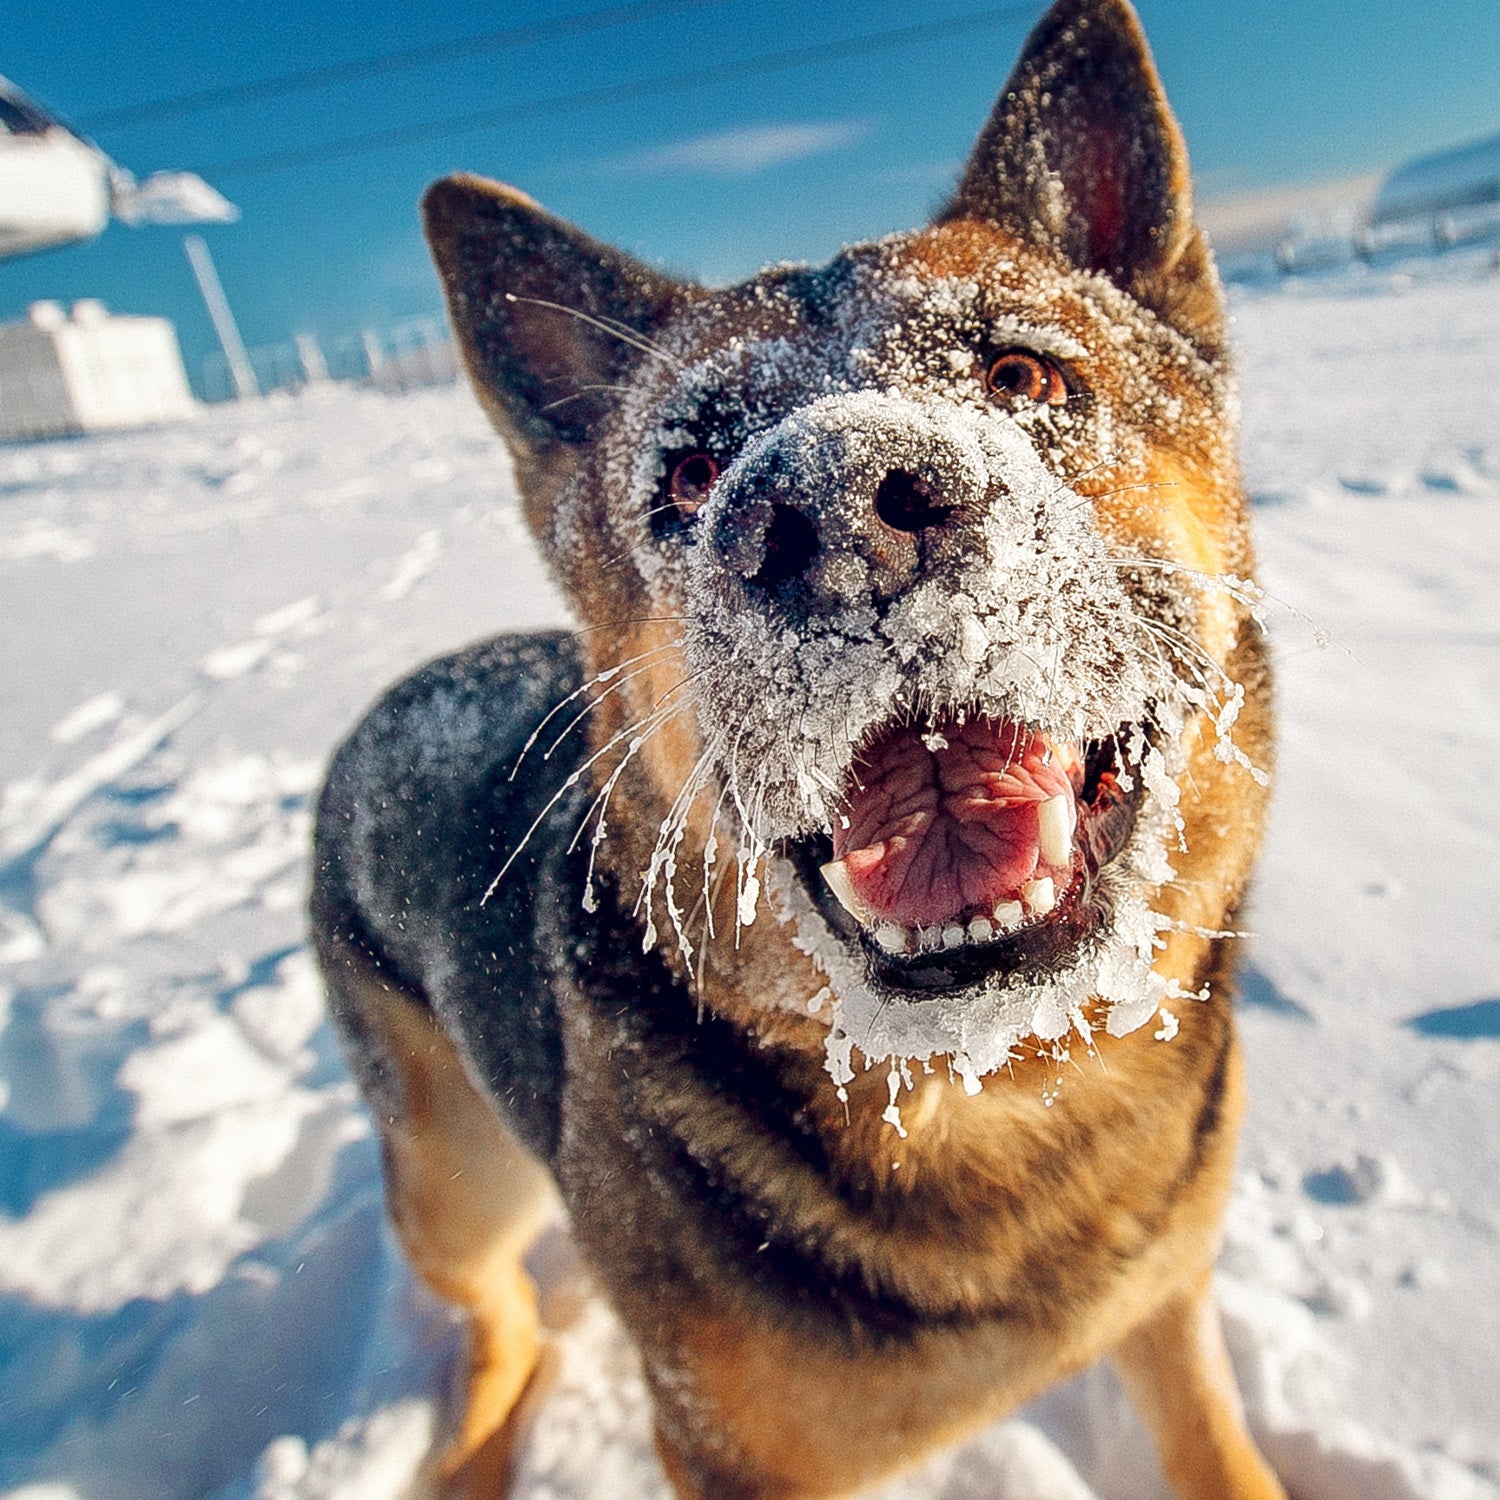 Keeping Dogs Safe During the Snowy Season: Top 4 Tips